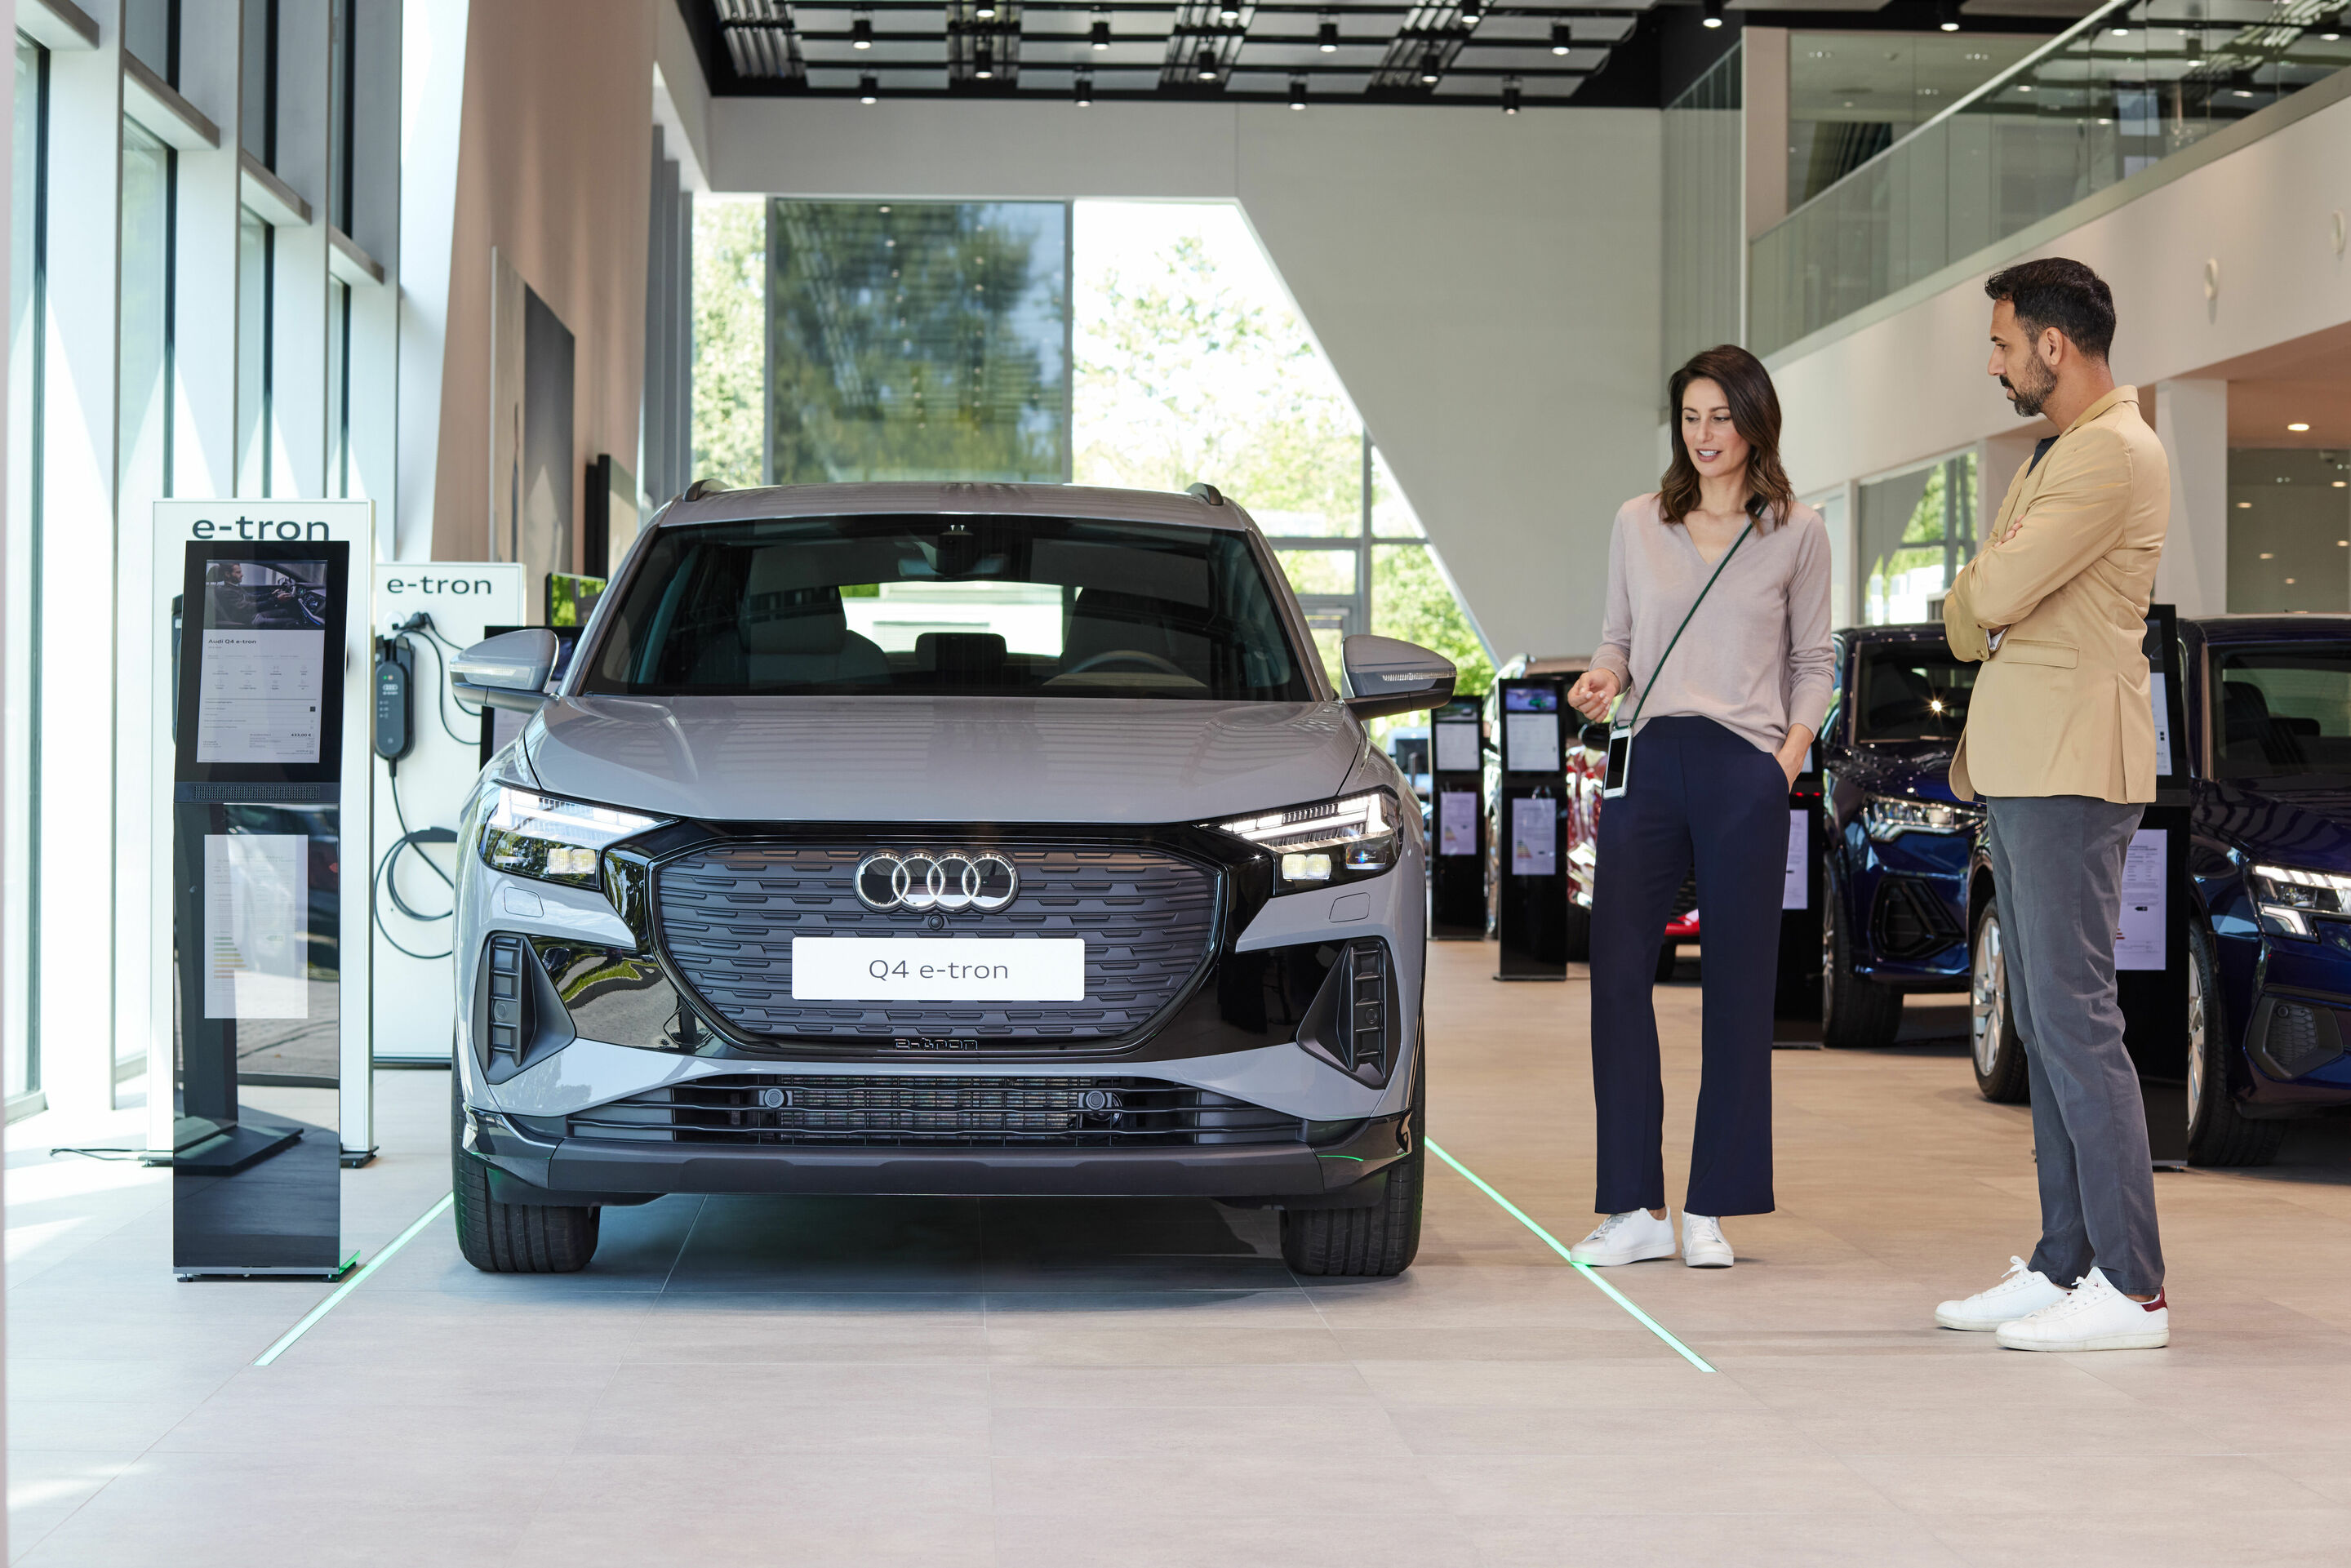 Audi is developing new business models and sales potential – in retail, in the vehicle, and via innovative mobility services.